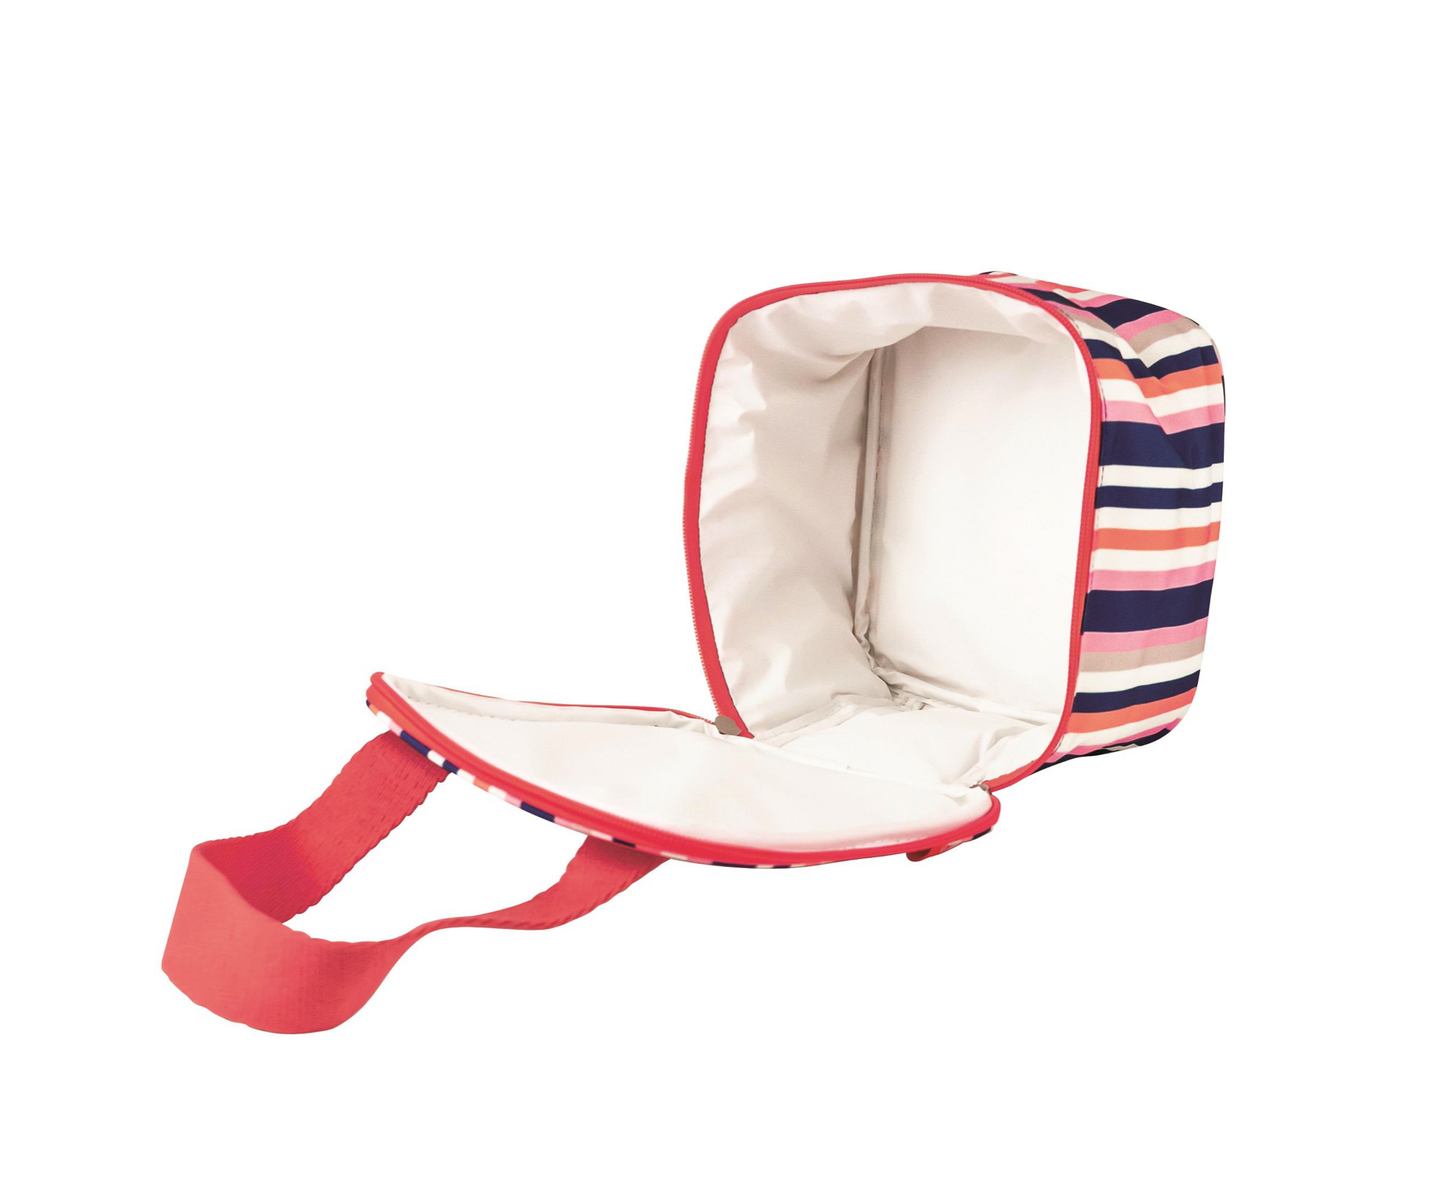 Joules insulated Lunch Bag, Stripes